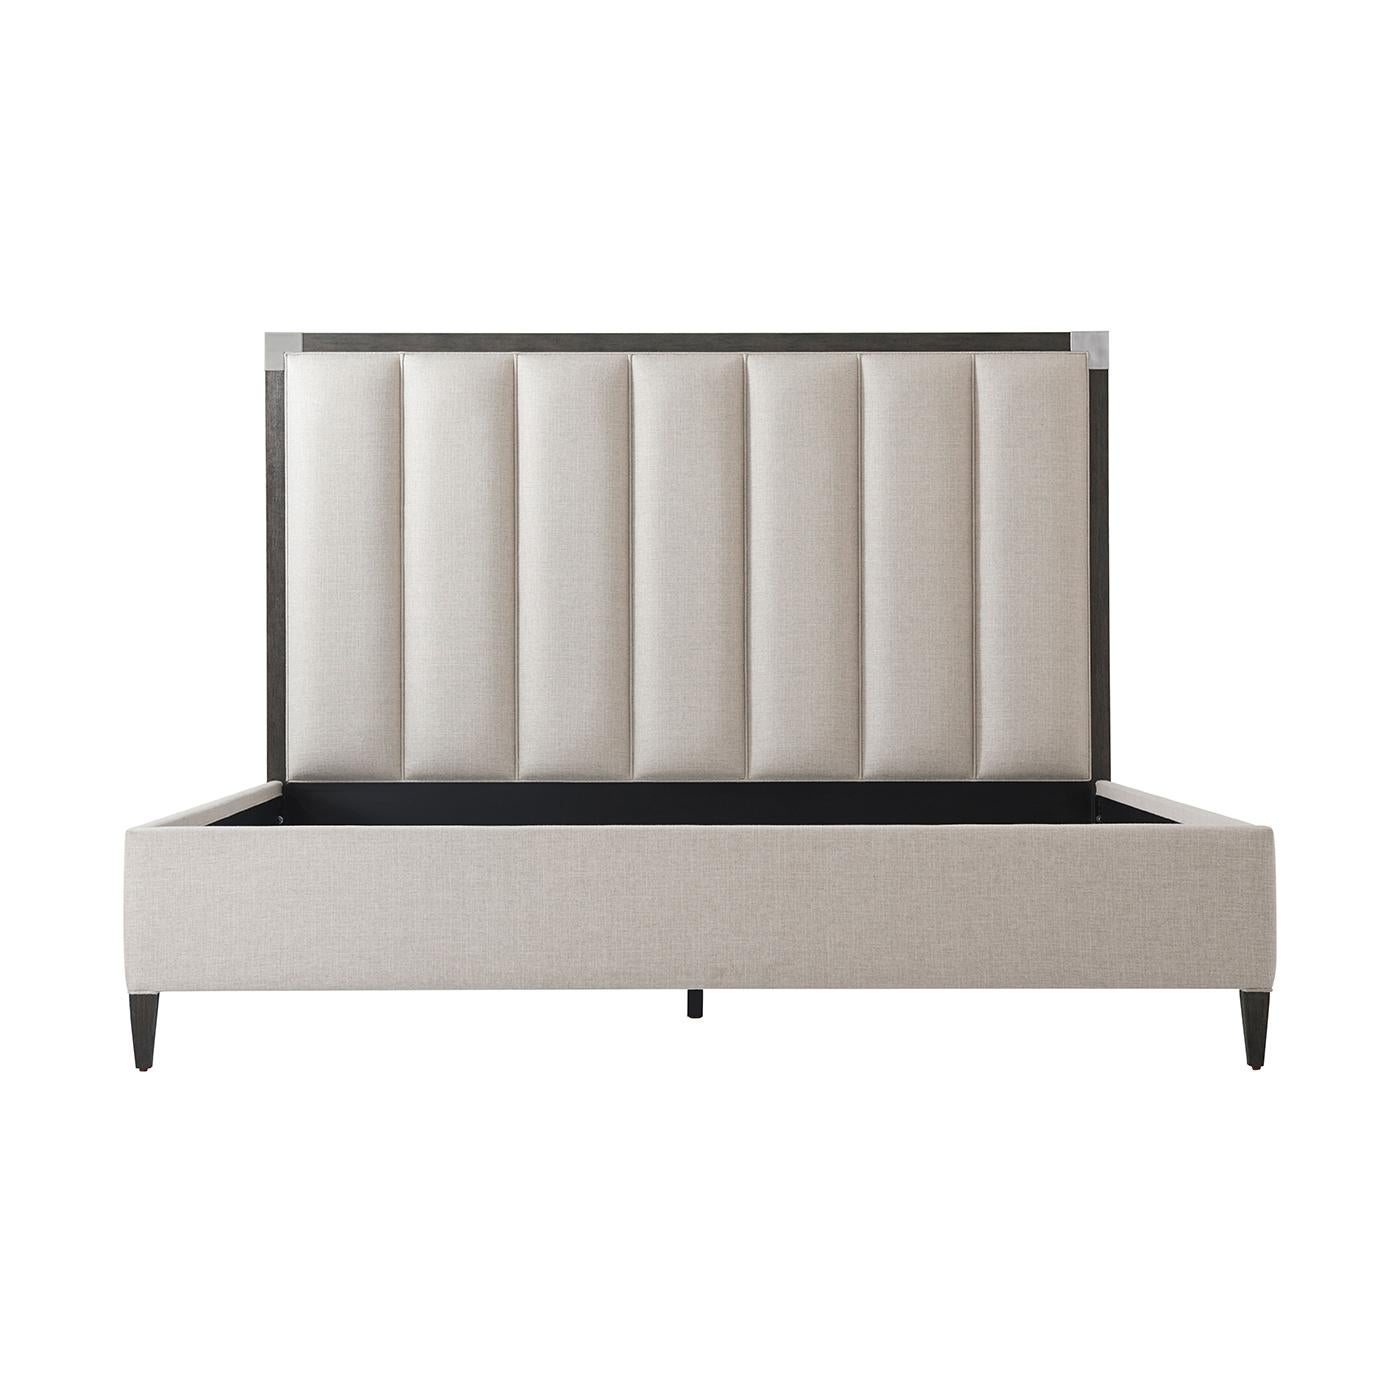 Art Deco Style bed with our Anise finish frame and brushed nickel finish corner mounts with a vertically channeled upholstered headboard, upholstered rails and raised on tapered legs.
Dimensions: 81